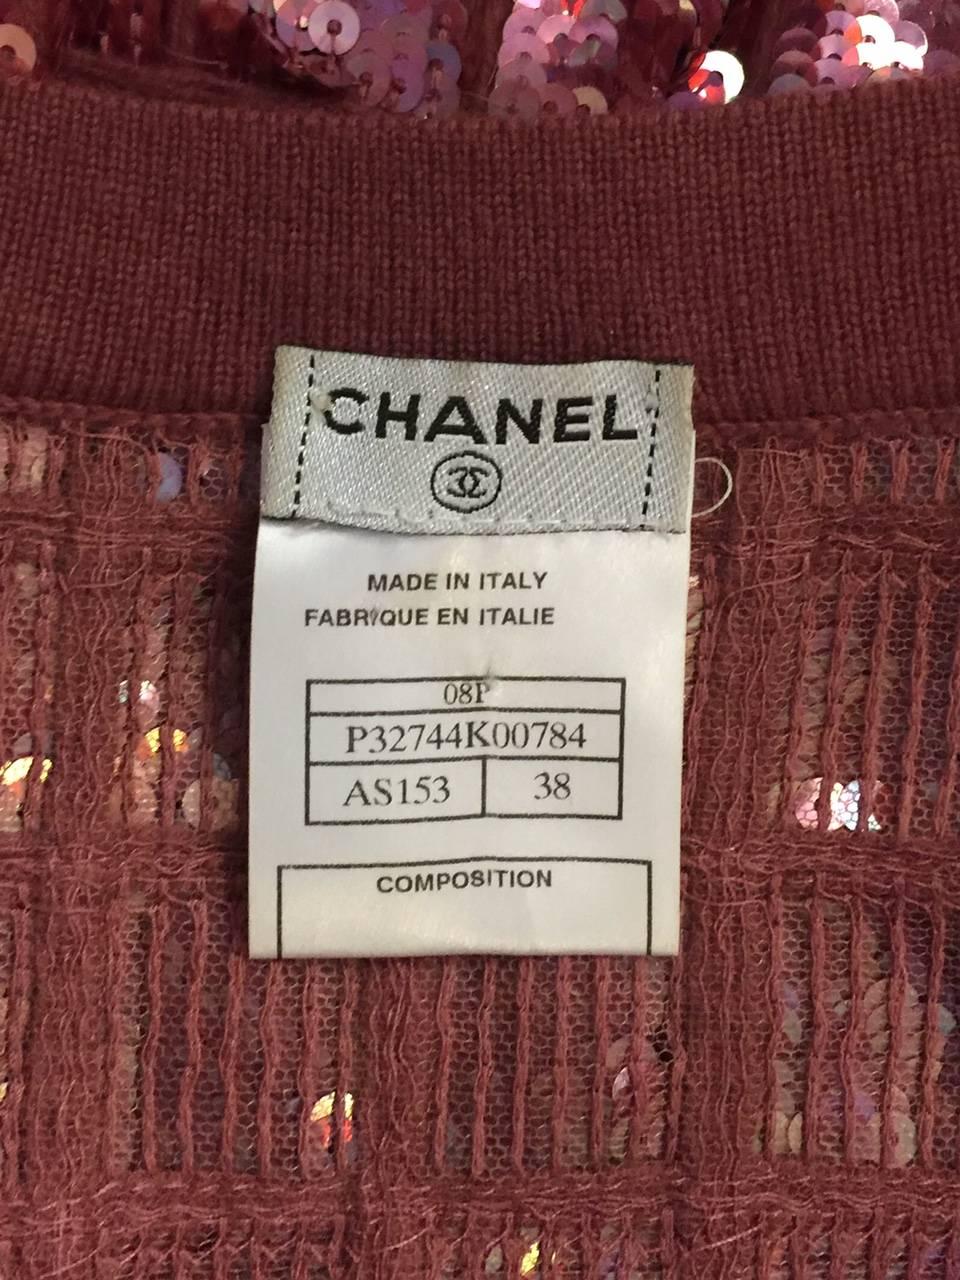 2008 Chanel Med. Burgundy Cashmere Cardigan Iridescent Sequin Embroidery  1